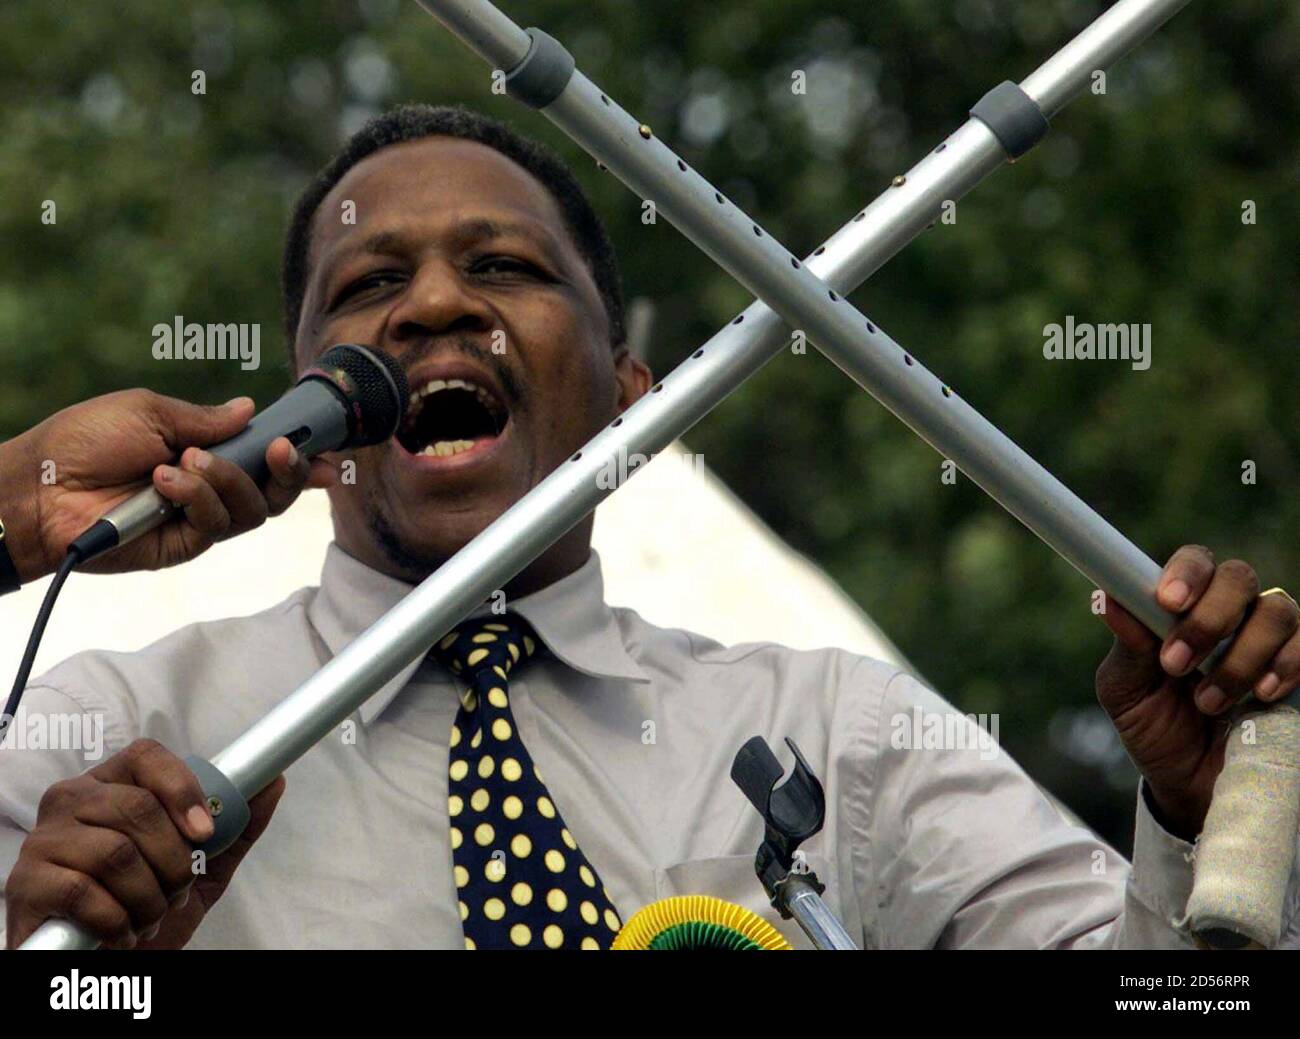 Mpumalanga Province premier Matthews Phosa urges supporters of the African National Congress (ANC) to put a cross next to [Mbeki]'s face on June 2 during an election campaign rally in a township May 22. [Mbeki], due to succeed retiring President [Nelson Mandela], vowed to fight corruption by government officials in his administration if he is made president. The ANC is expected to win the election overwhelmingly. Stock Photo